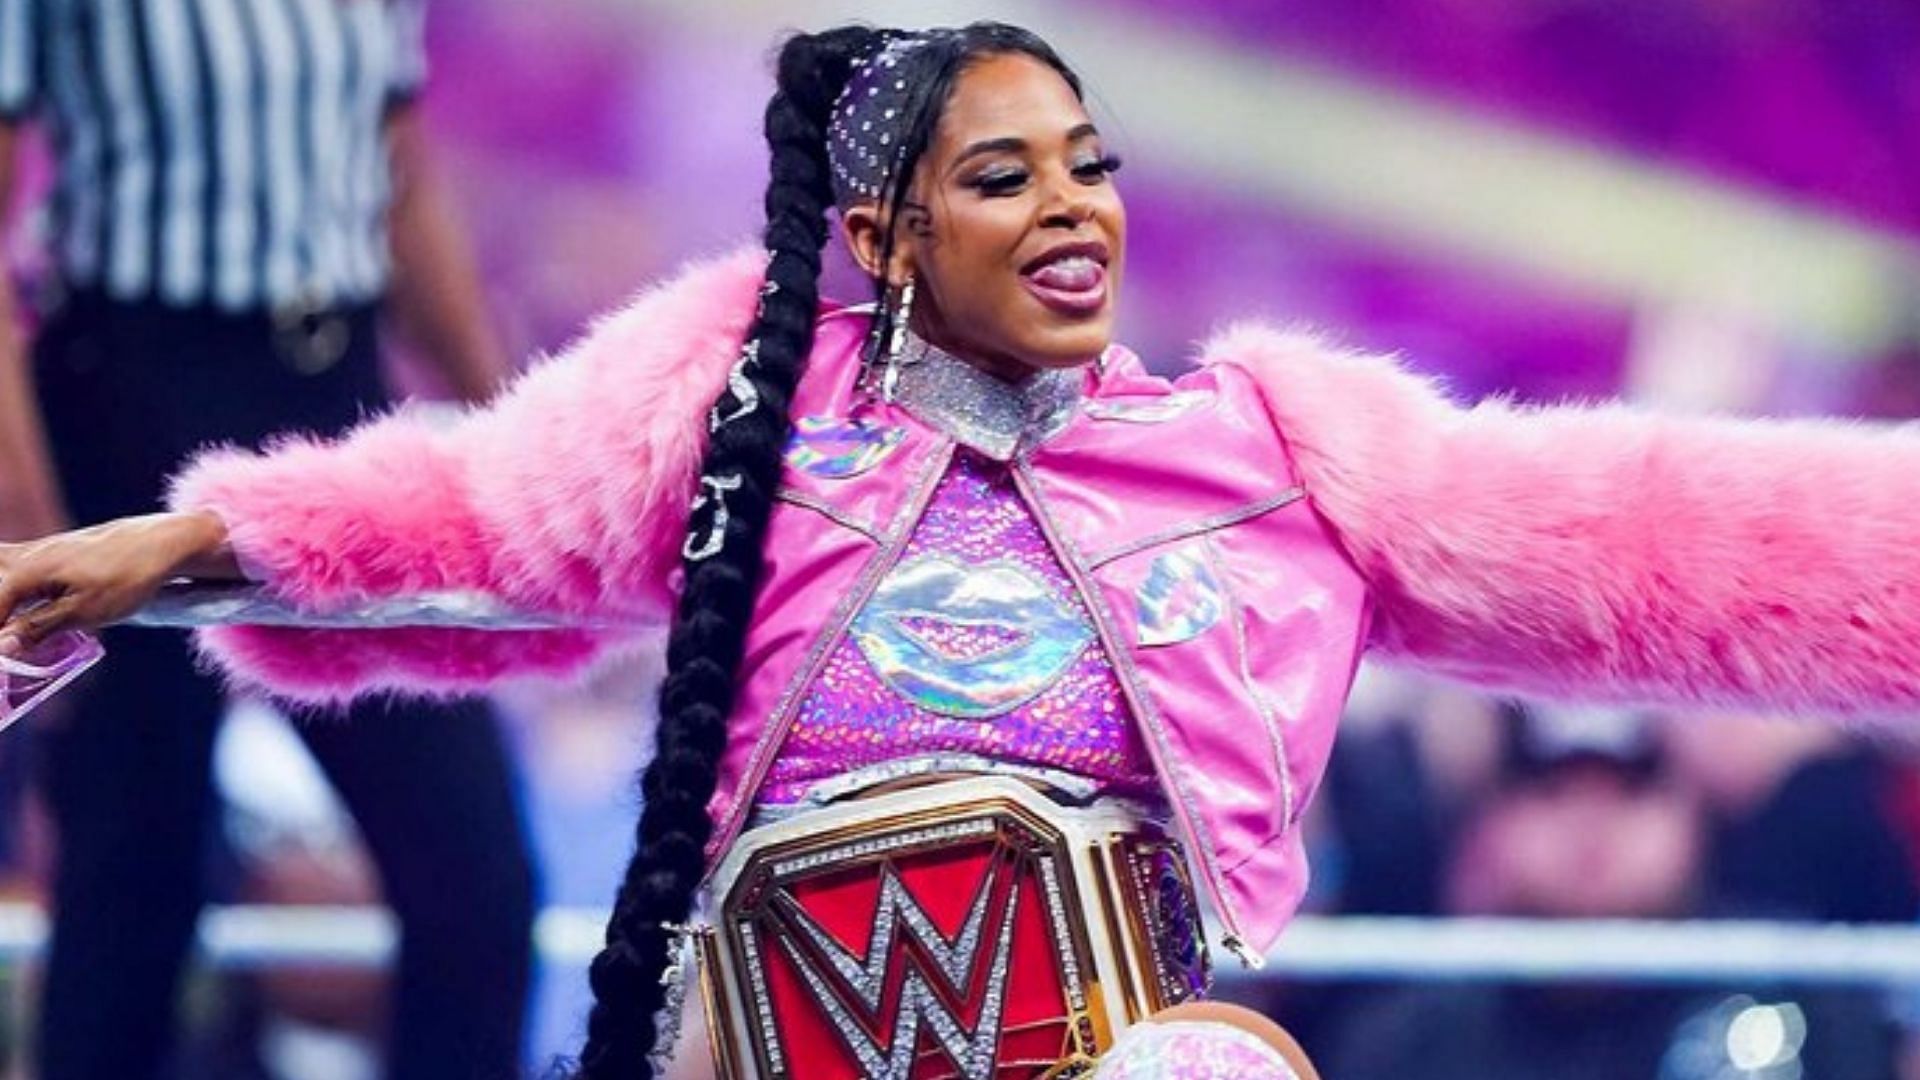 Bianca Belair is a former RAW and SmackDown Women